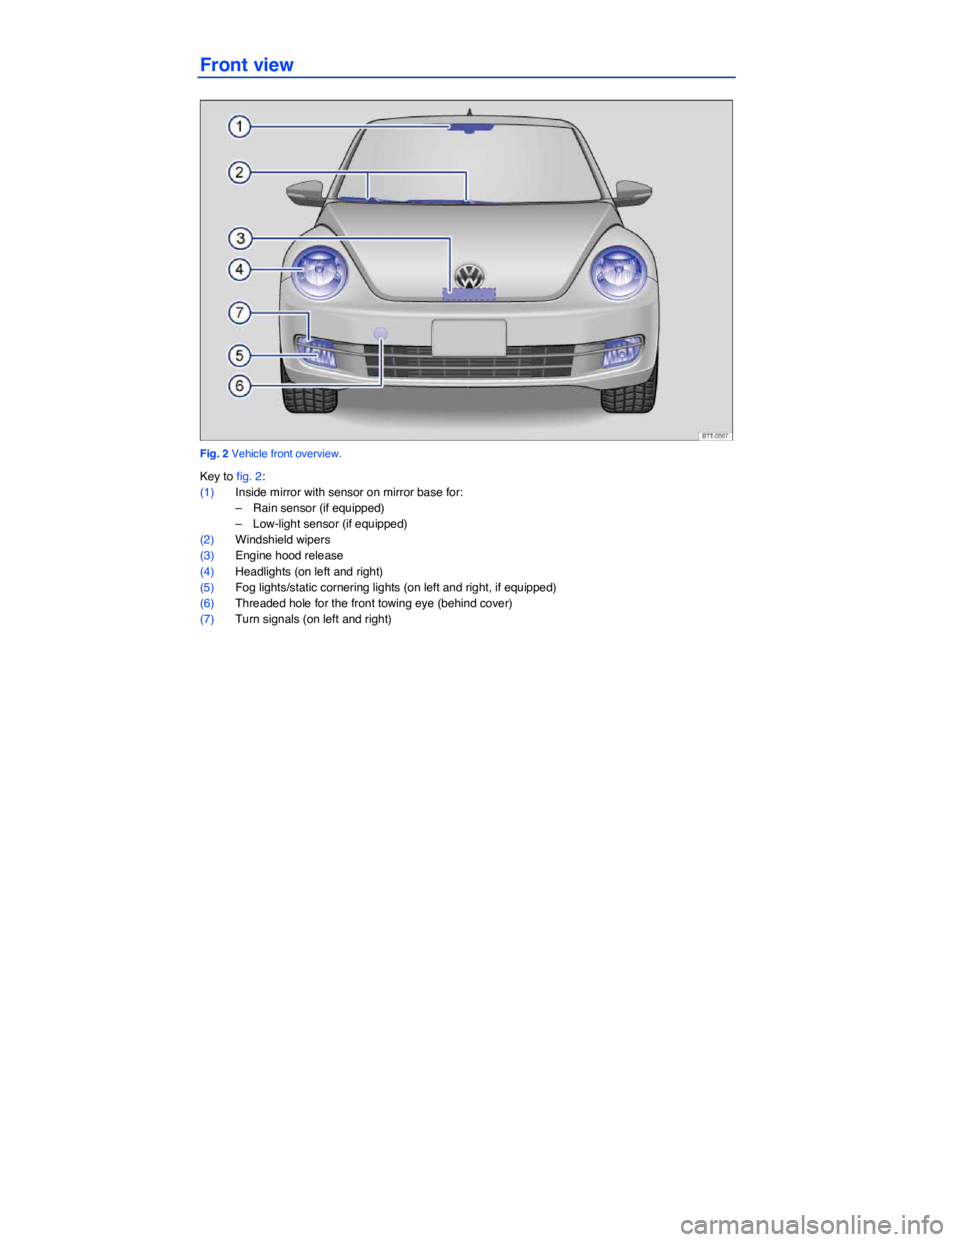 VOLKSWAGEN BEETLE 2015  Owner´s Manual  
Front view 
 
Fig. 2 Vehicle front overview. 
Key to fig. 2: 
(1) Inside mirror with sensor on mirror base for: 
–  Rain sensor (if equipped)  
–  Low-light sensor (if equipped)  
(2) Windshield